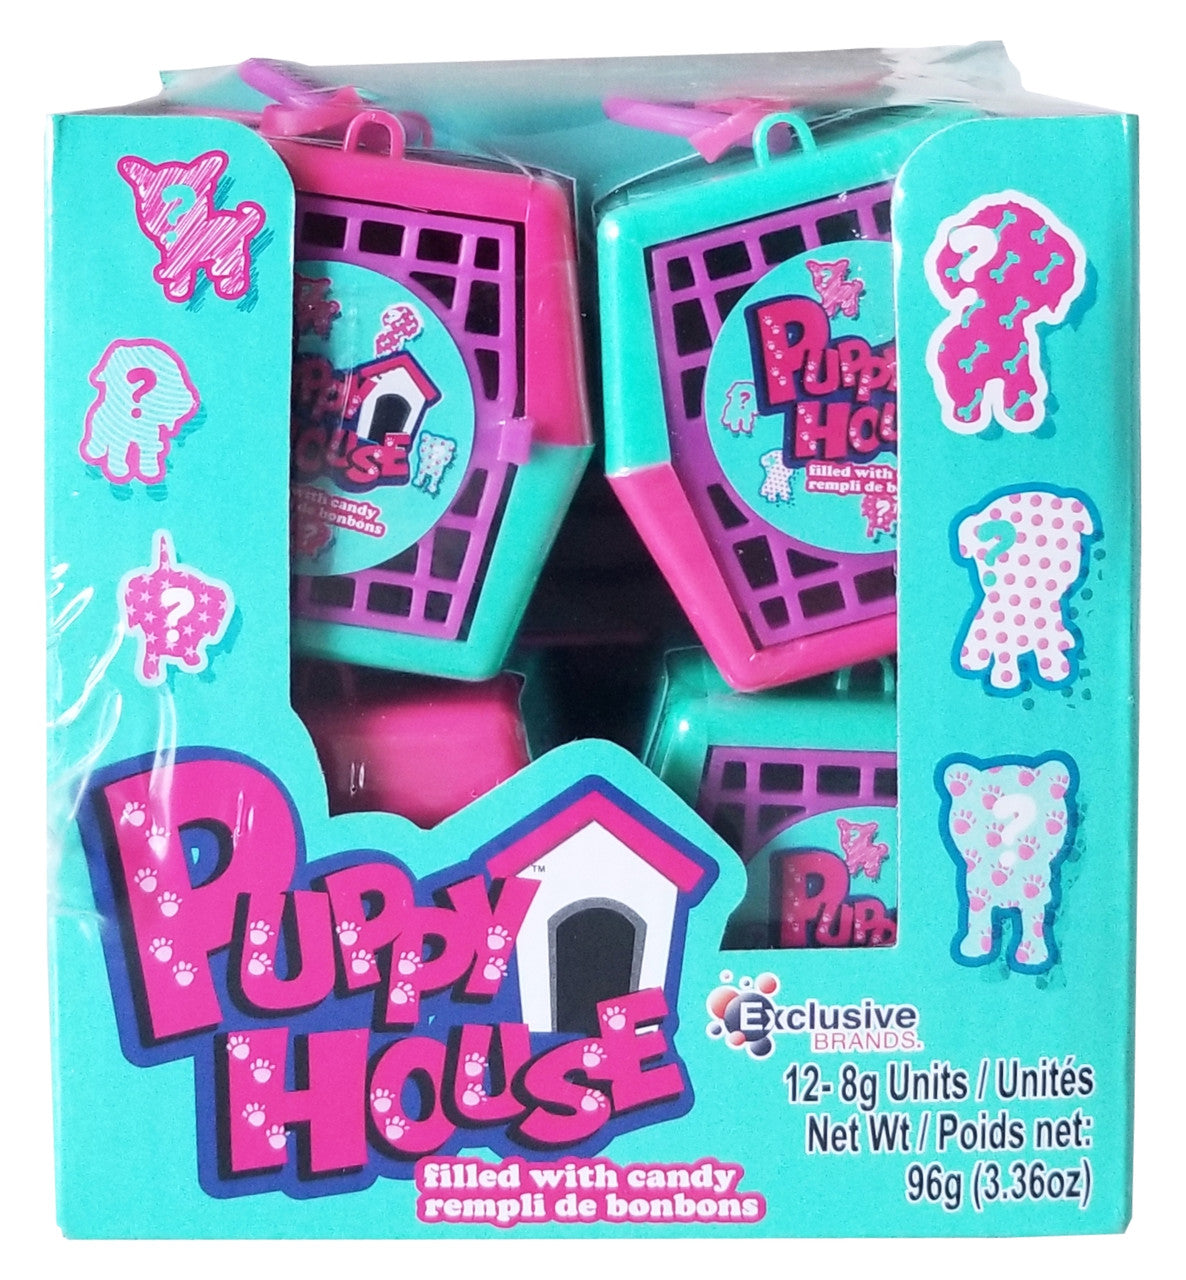 Exclusive Brands Puppy House filled with Candy, (12 x 8g/0.3 oz.), 96g/3.36 oz., Box {Imported from Canada}